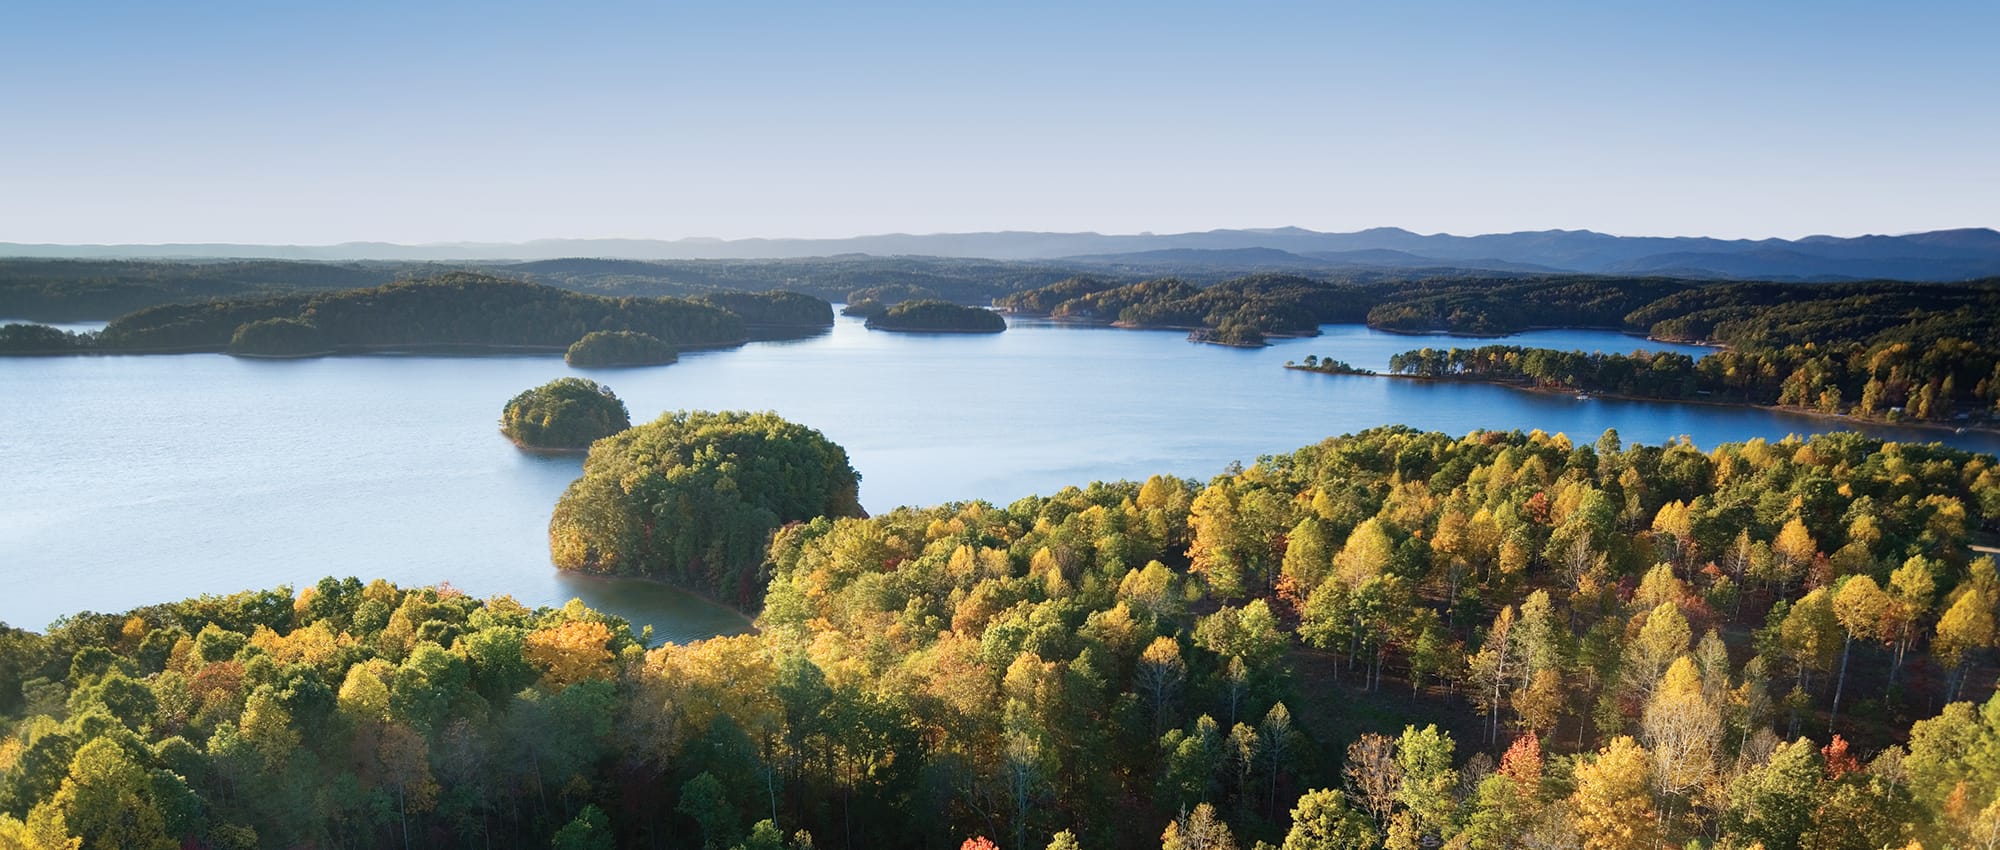 The Reserve at Lake Keowee: A Picturesque Community